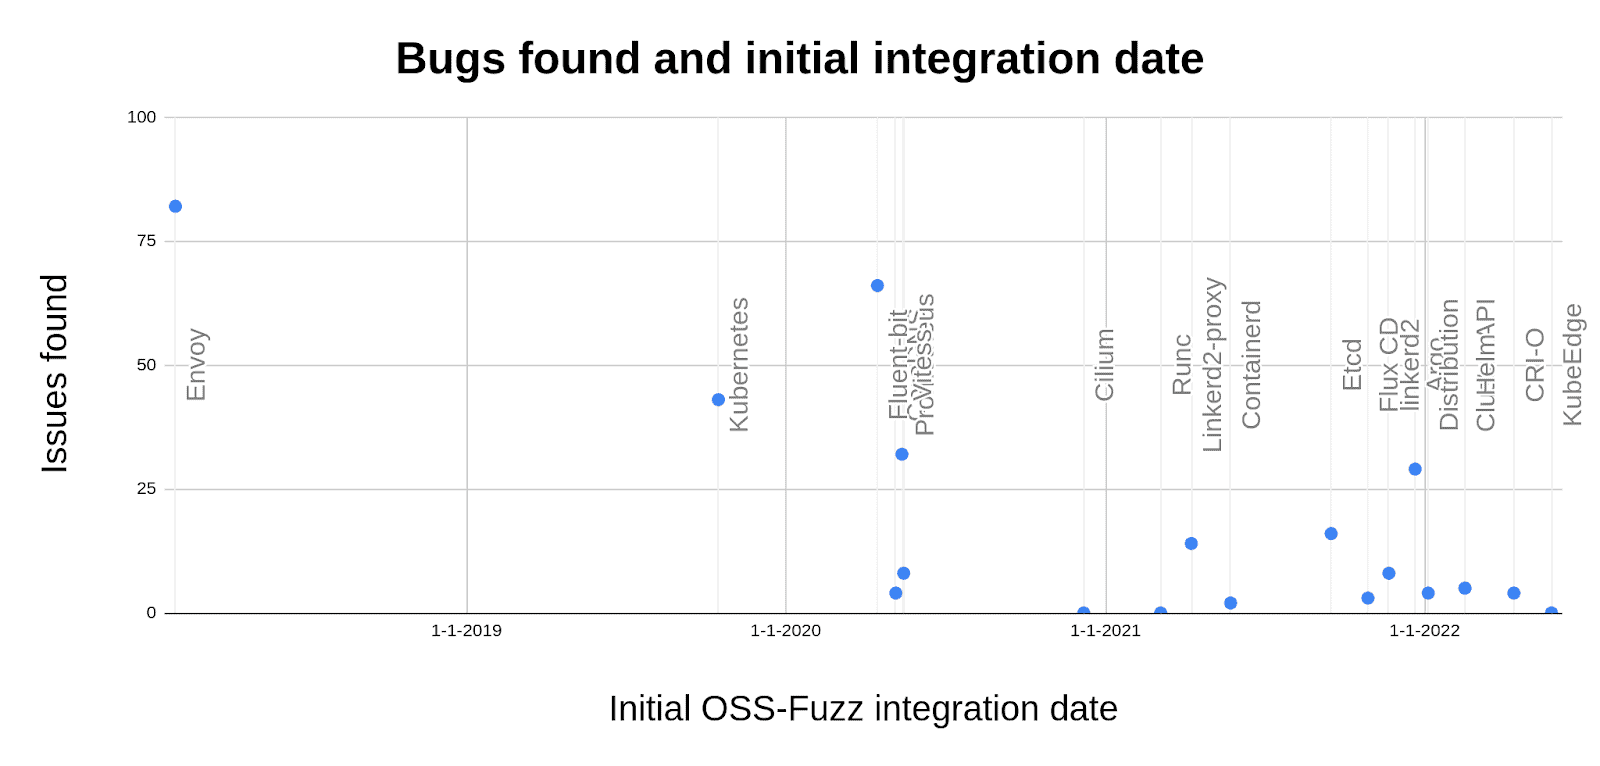 Dot chart shows bugs found and initial integration date from 2019 TO 2022